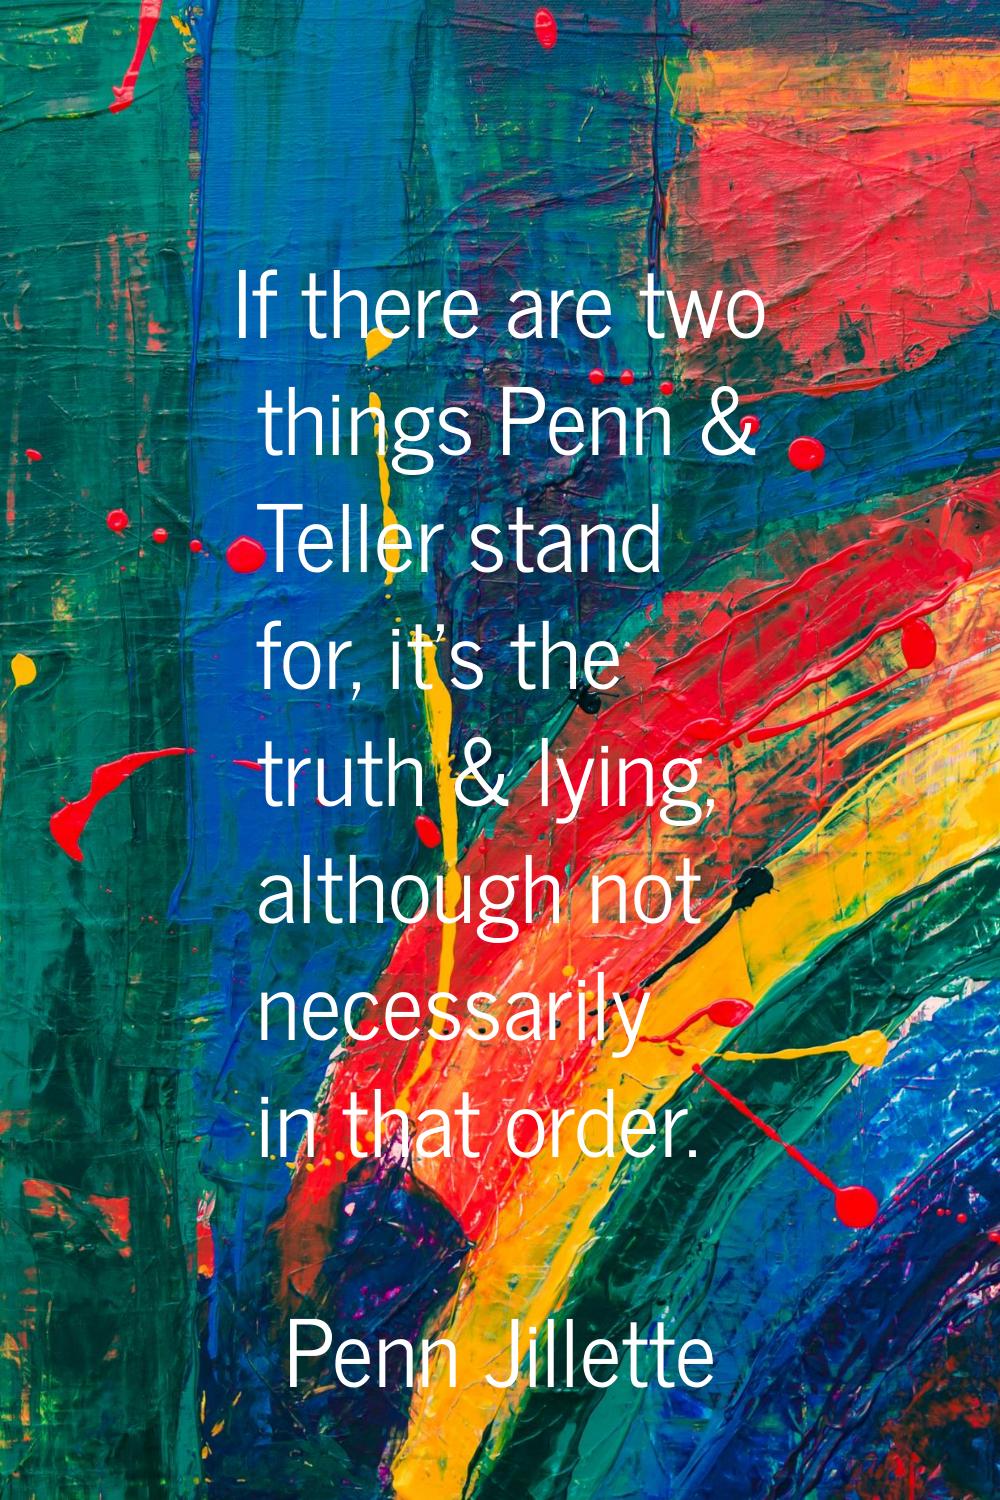 If there are two things Penn & Teller stand for, it's the truth & lying, although not necessarily i